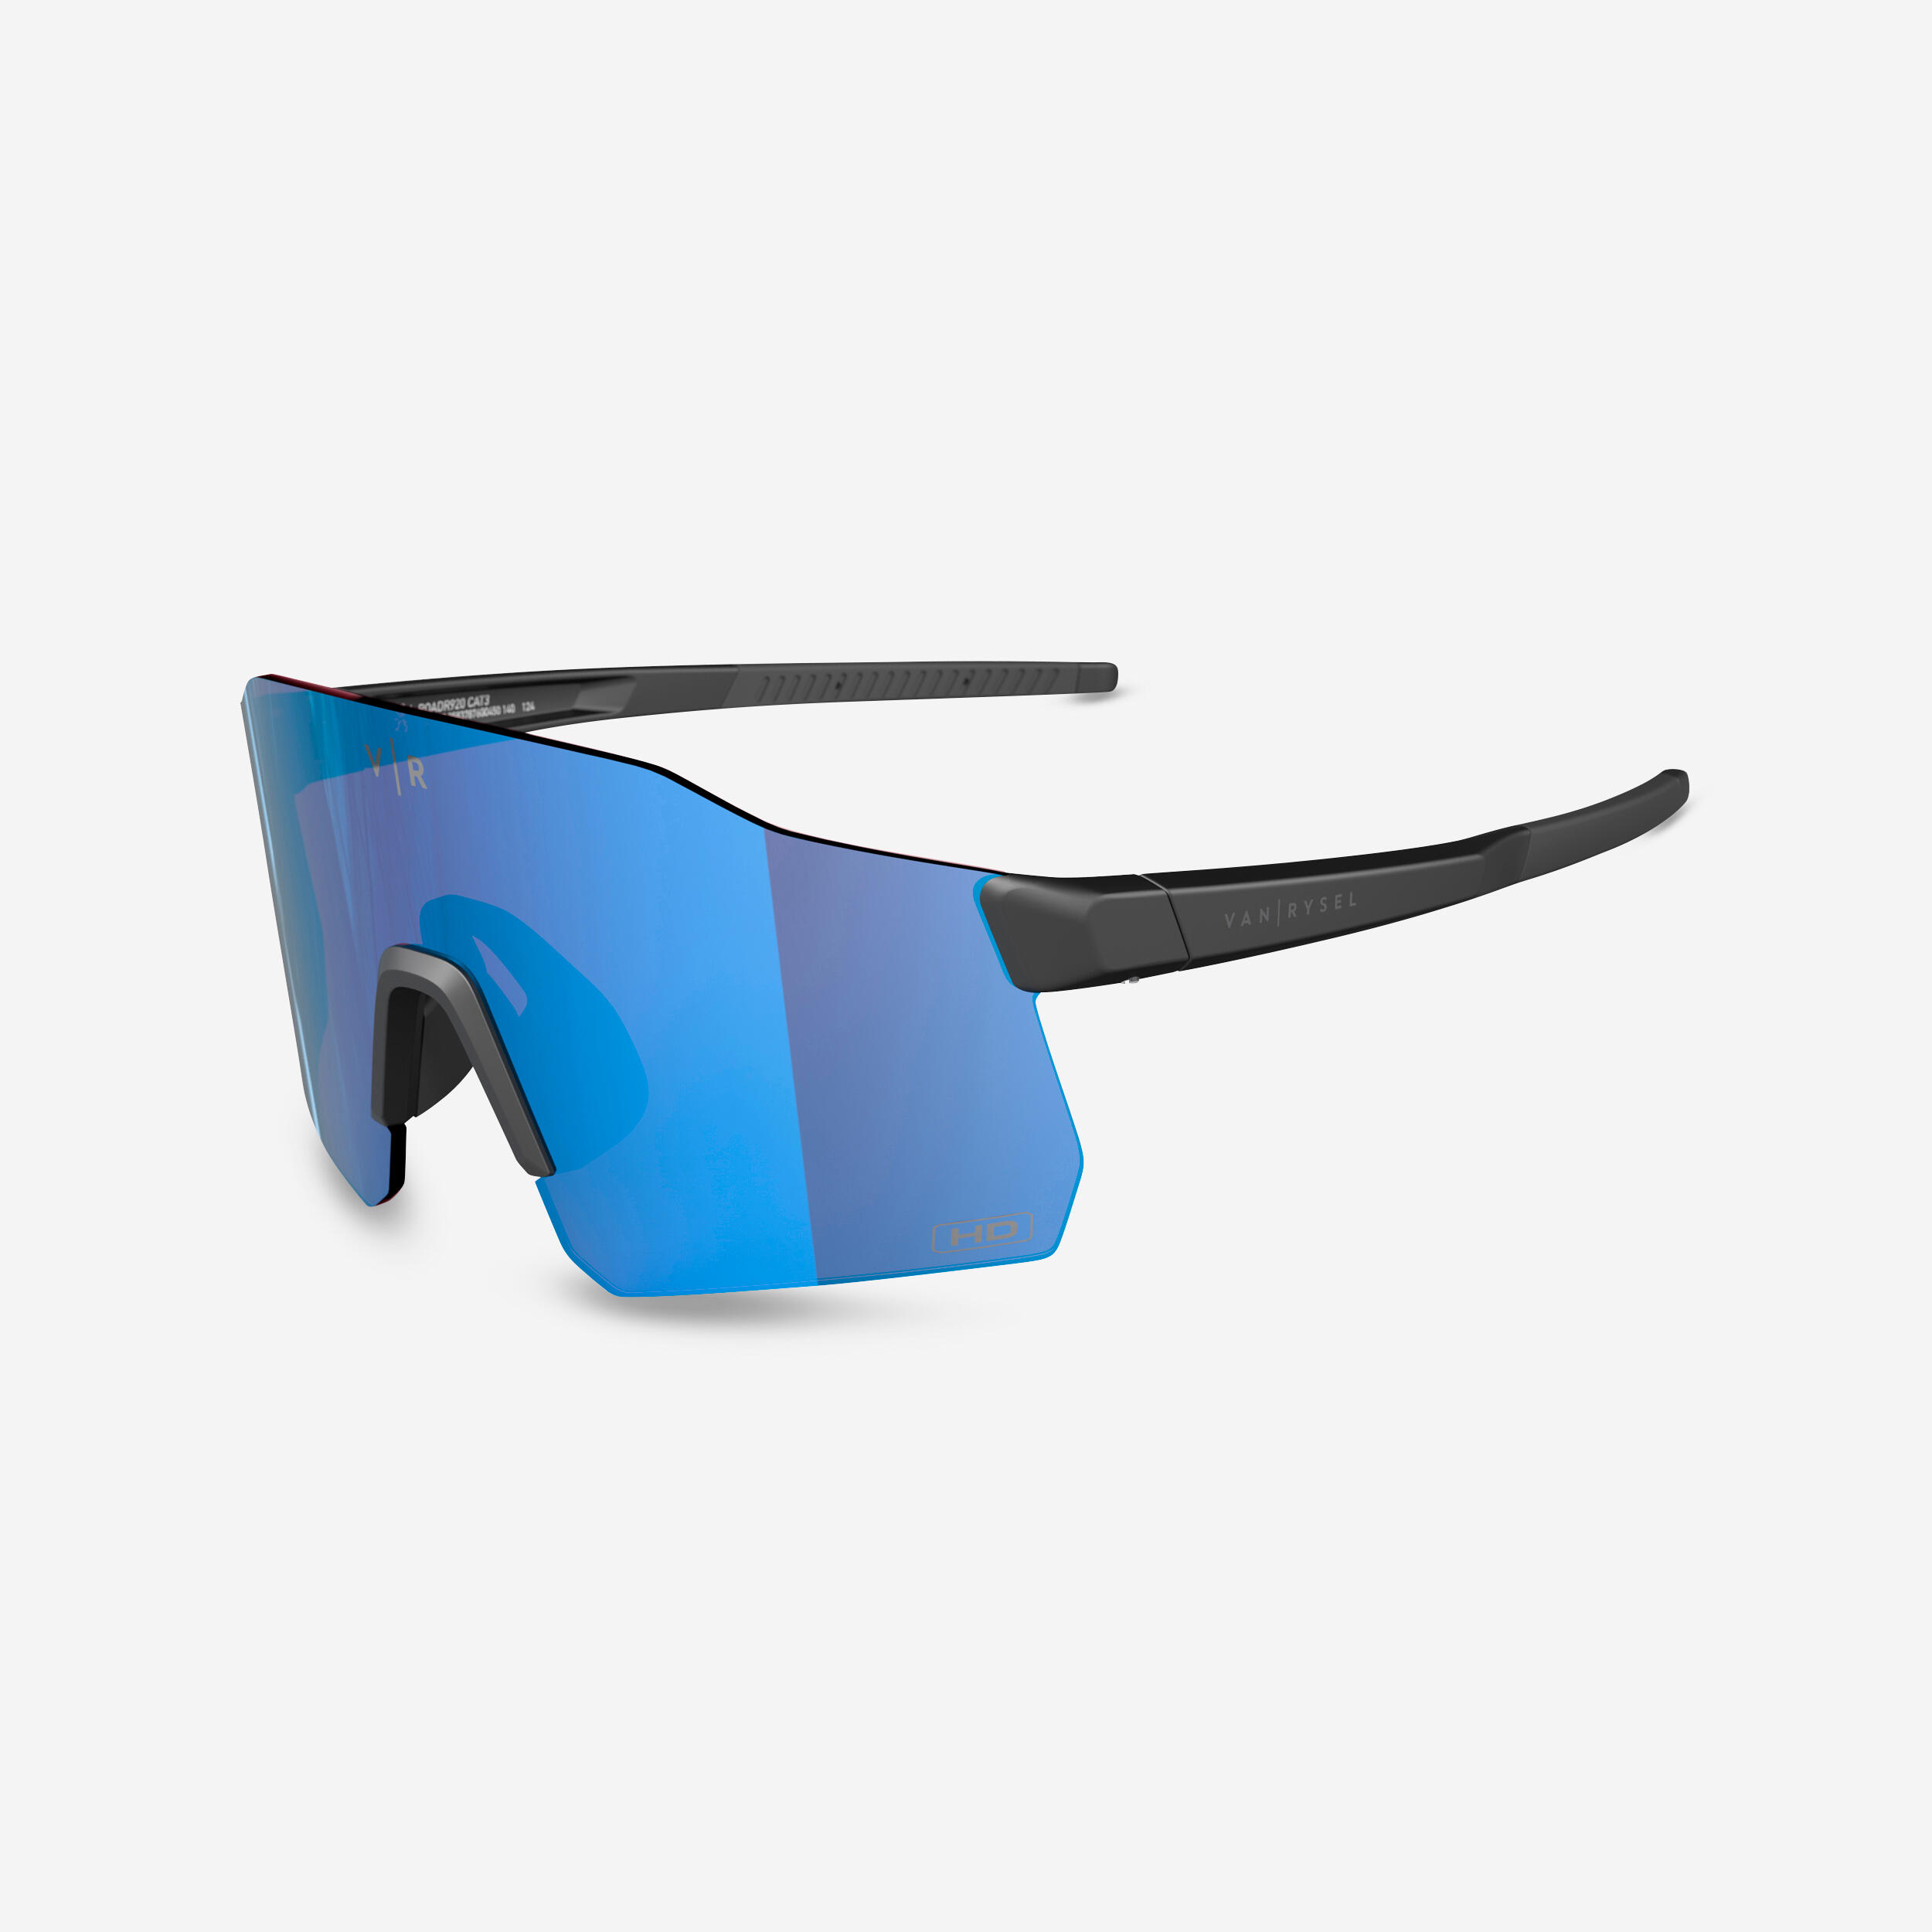 Adult Cycling Sunglasses RoadR 920 Category 3 High-Definition - Blue 1/6